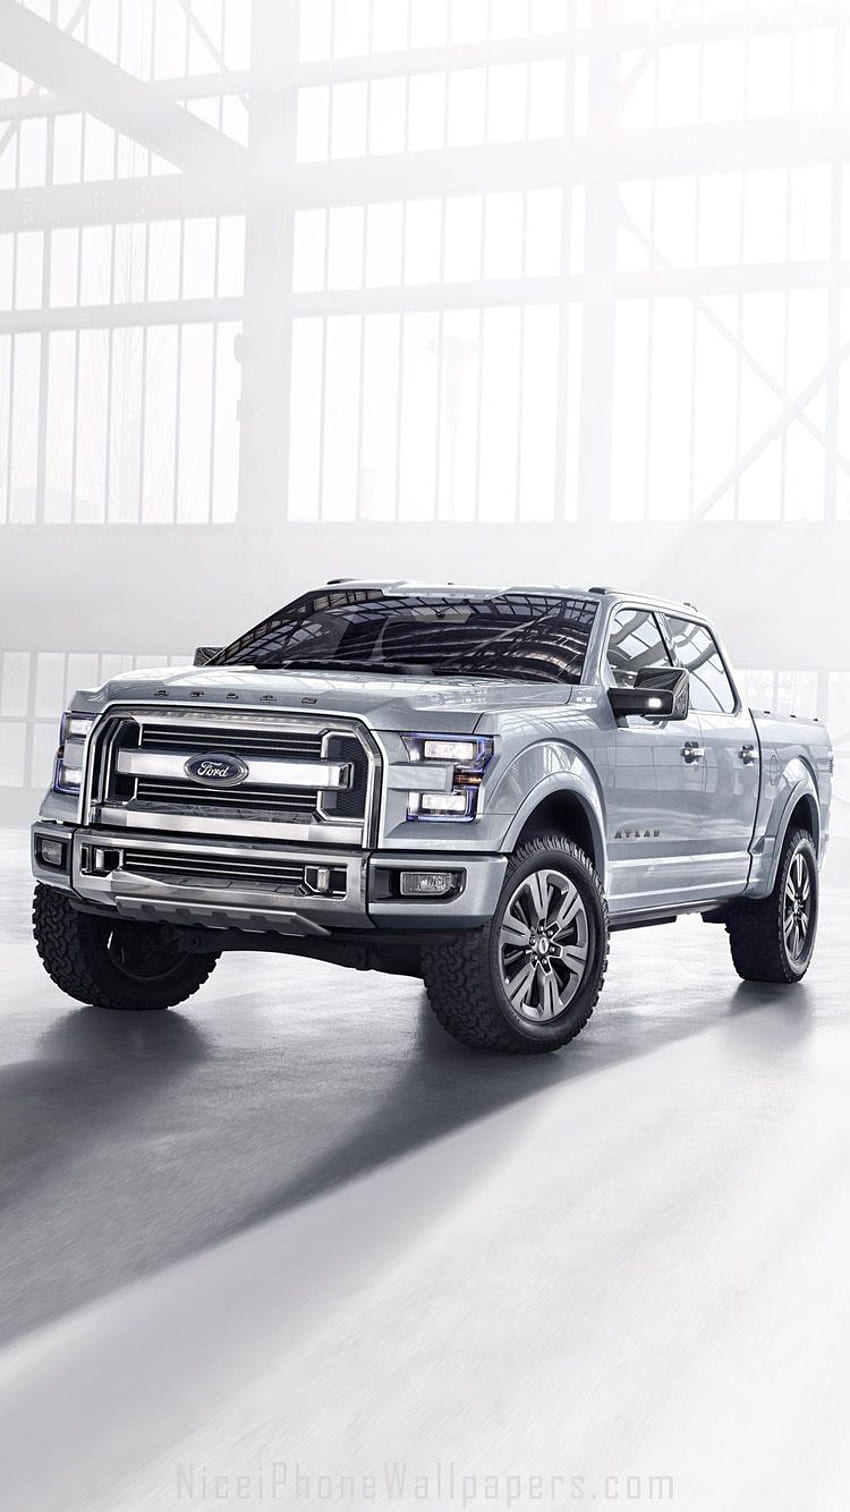 Ford Atlas IPhone 6 6 Plus и фон. Ford Pickup, Ford Bronco, Ford F150, Ford Raptor HD тапет за телефон